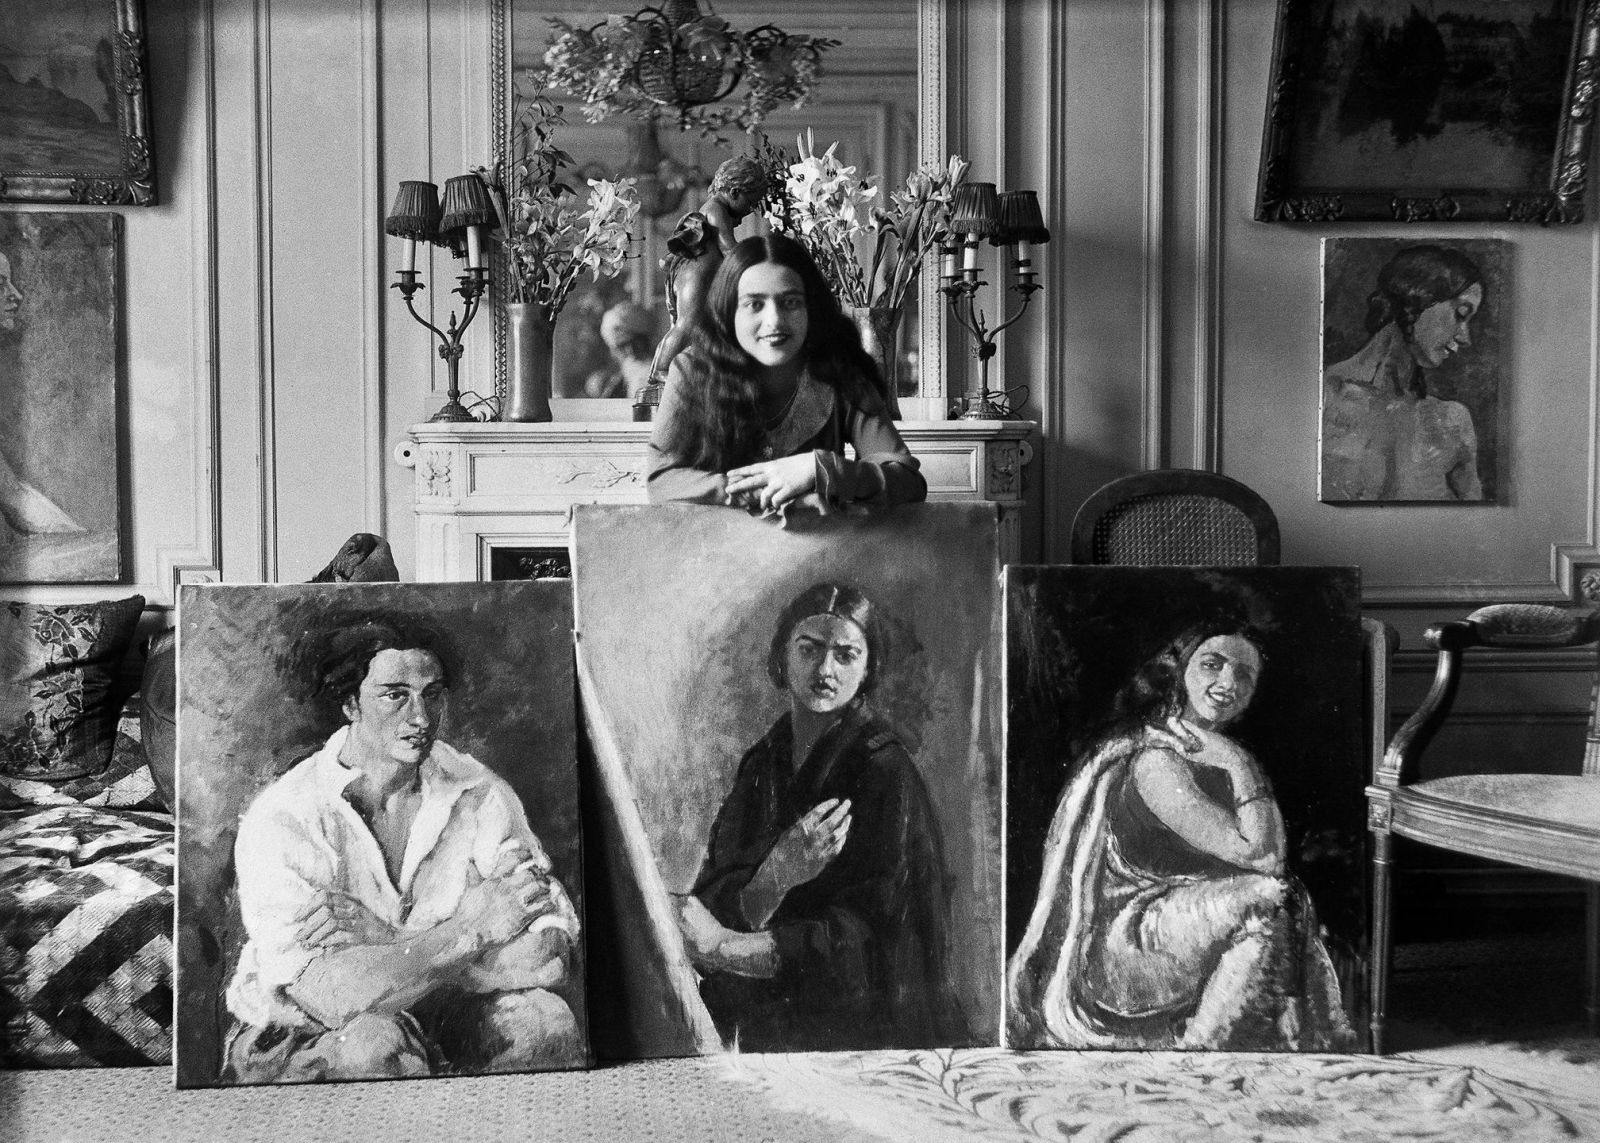 Amrita Sher-Gil with her paintings (Umrao Singh Sher-Gil reflected in the mirror), Paris, France, c.1930 (The Sher-Gil Archives)